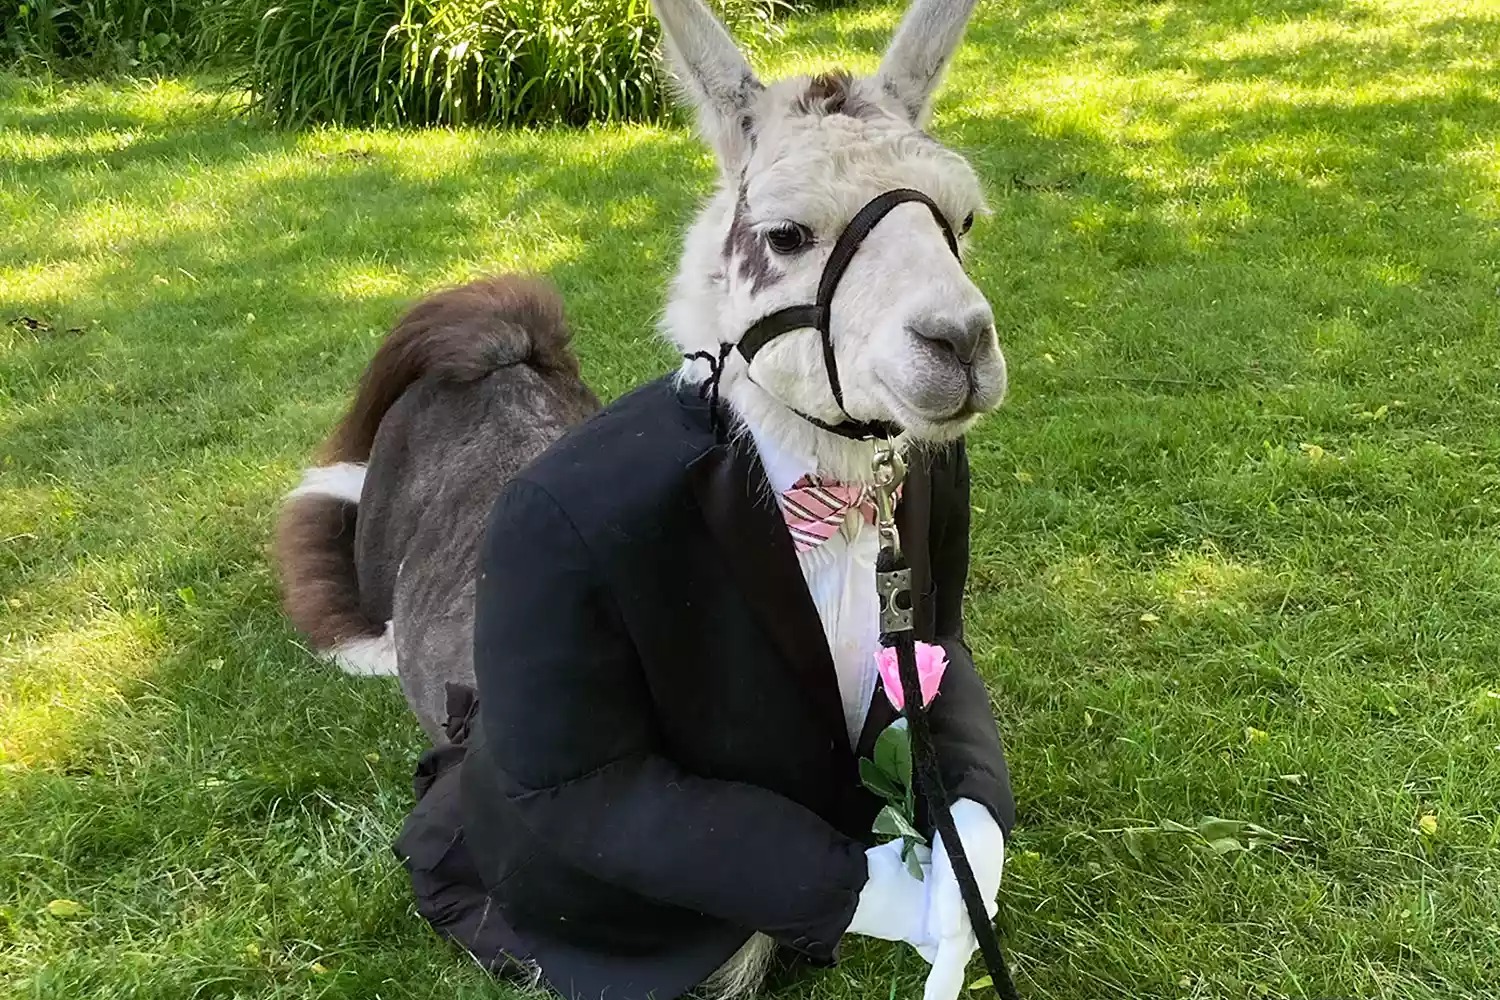 EXCLUSIVE: Llama dressed as Groomsman Delights Guests at a New York wedding